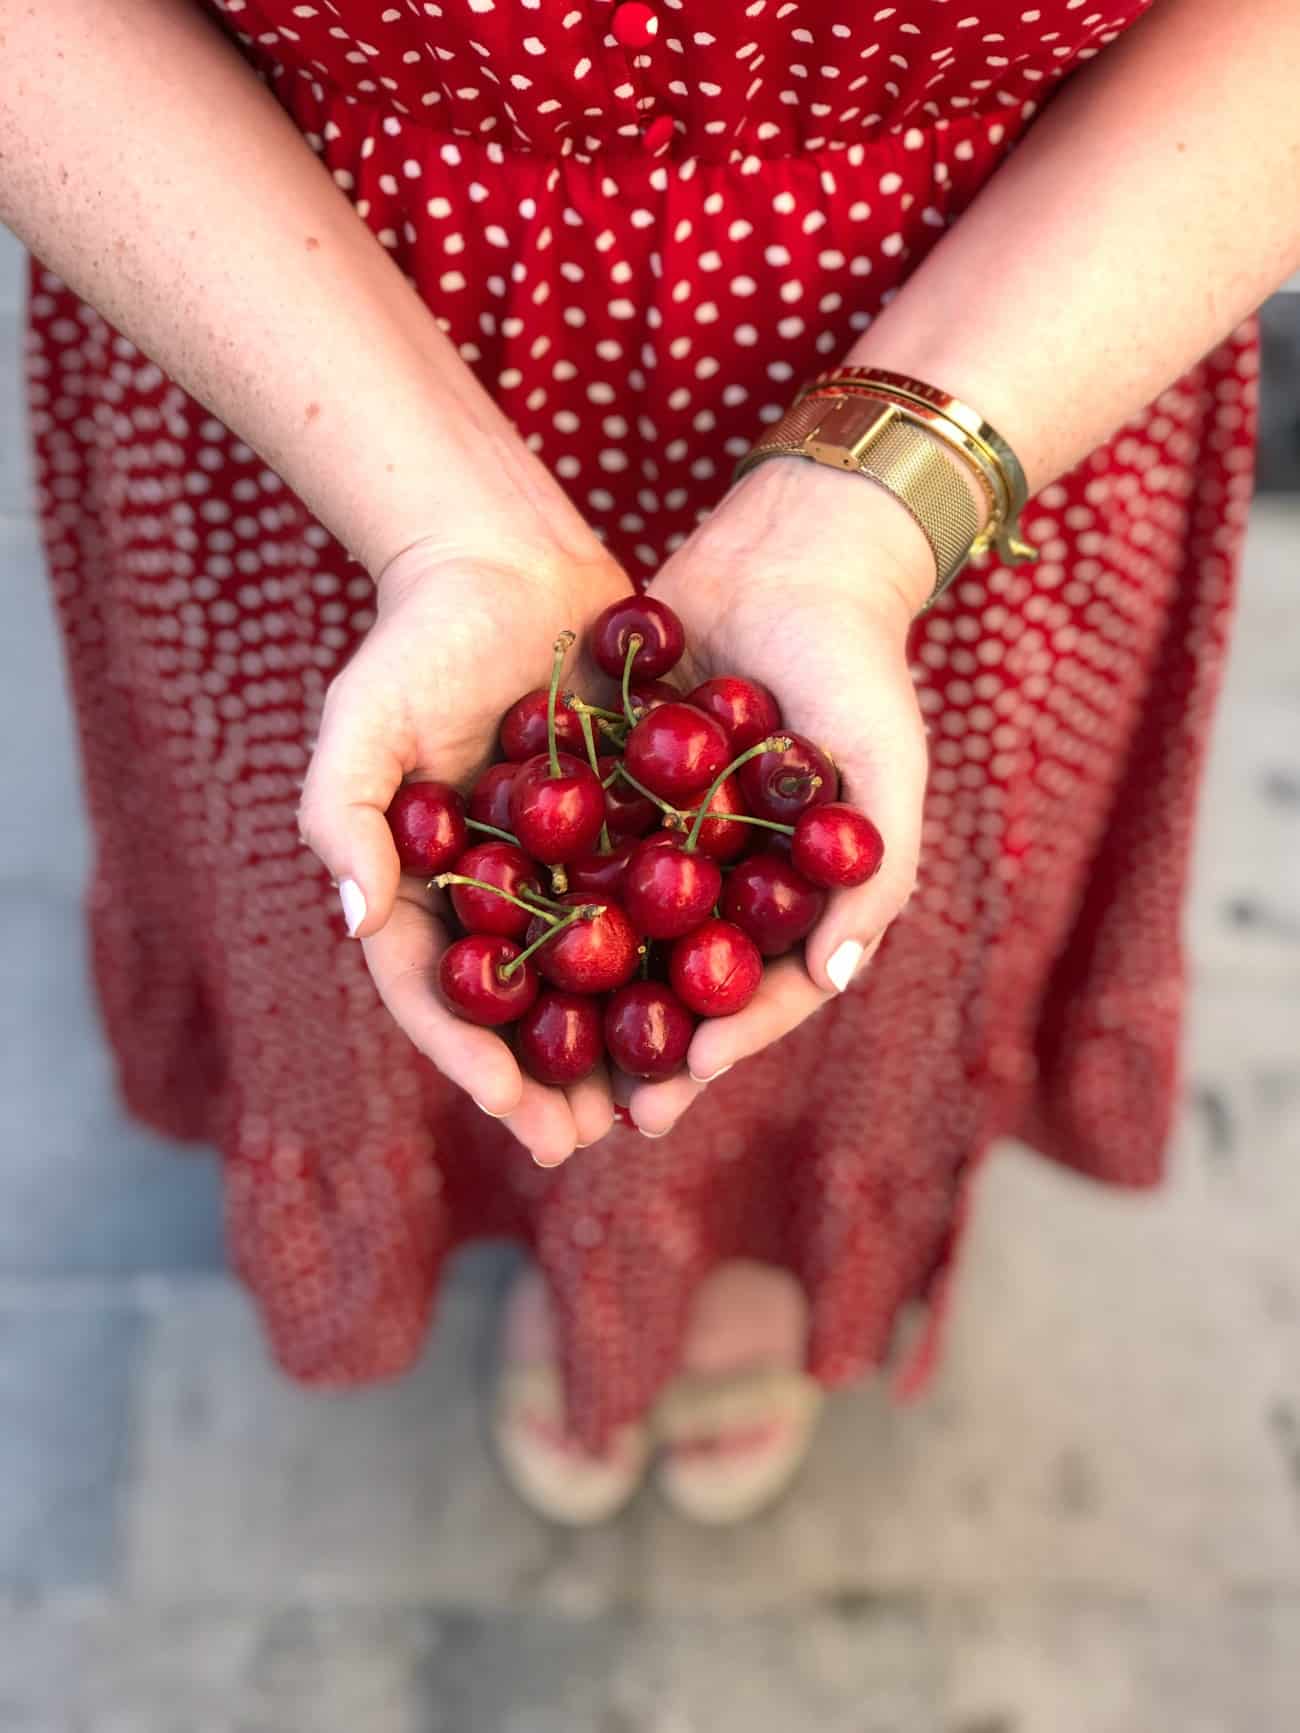 Provence Cherries | Where we stayed in Provence 